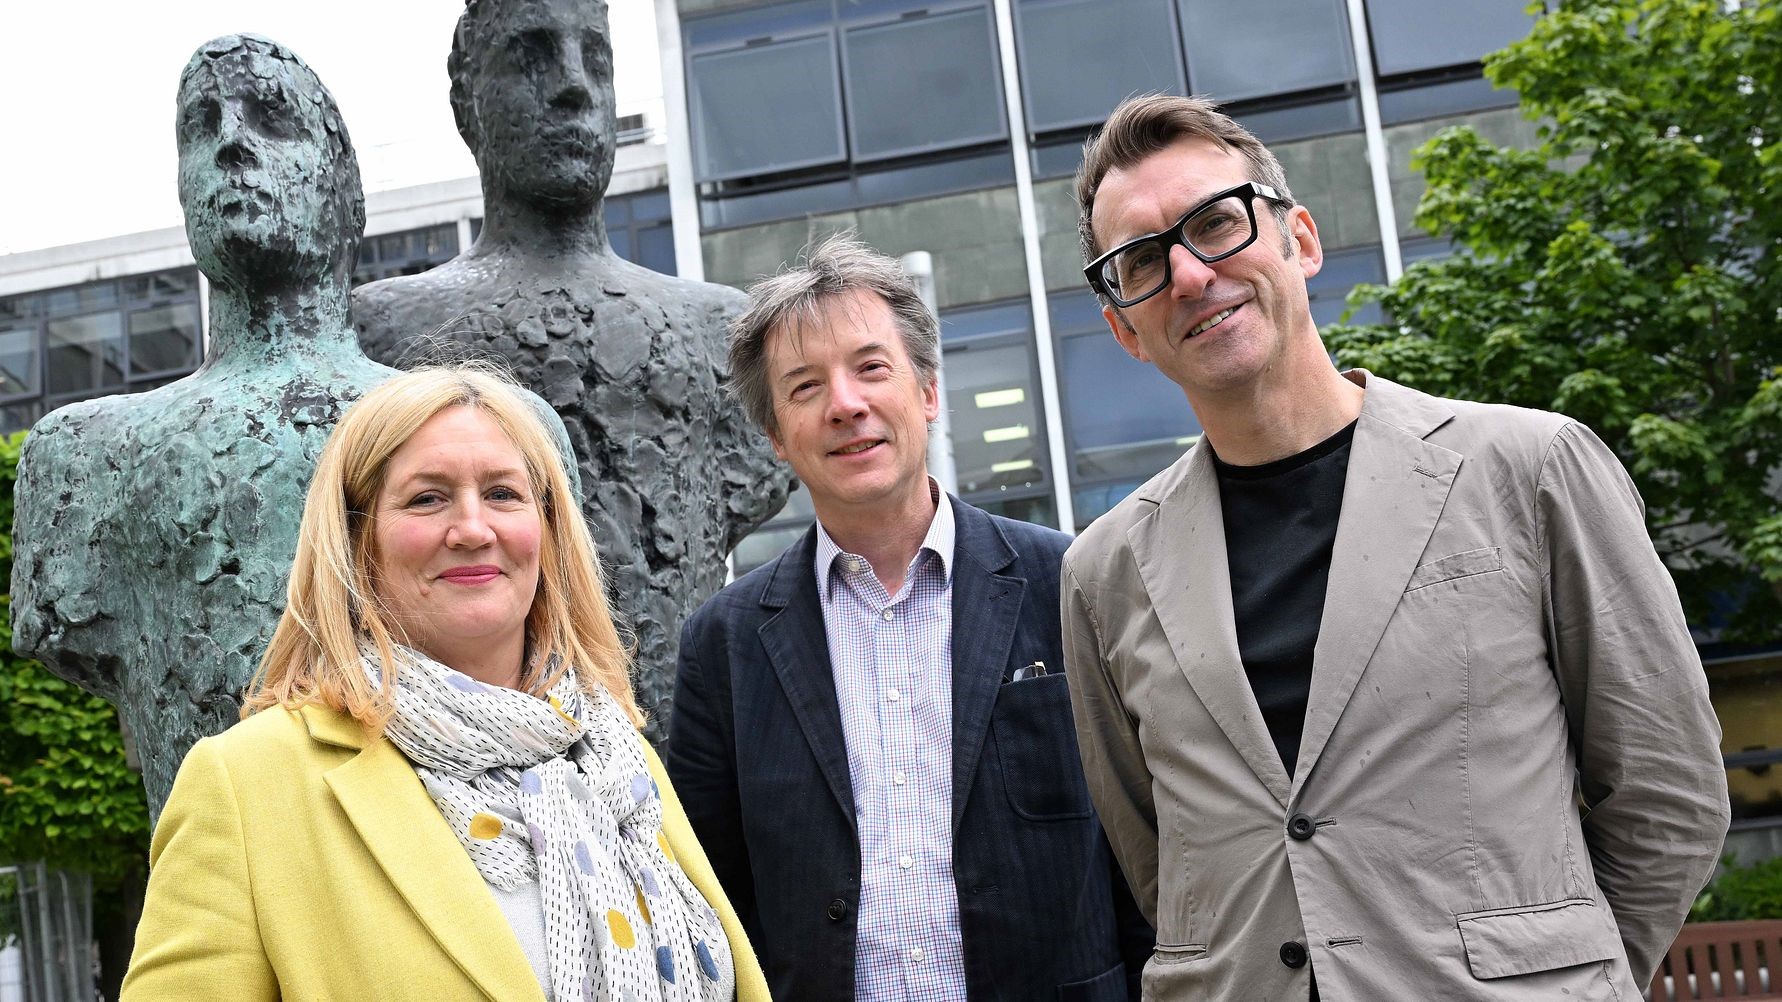 Jacqui Kell, Neil Percival and Keith Merrin standing outside smiling to camera with two large metal sculptures in the background.